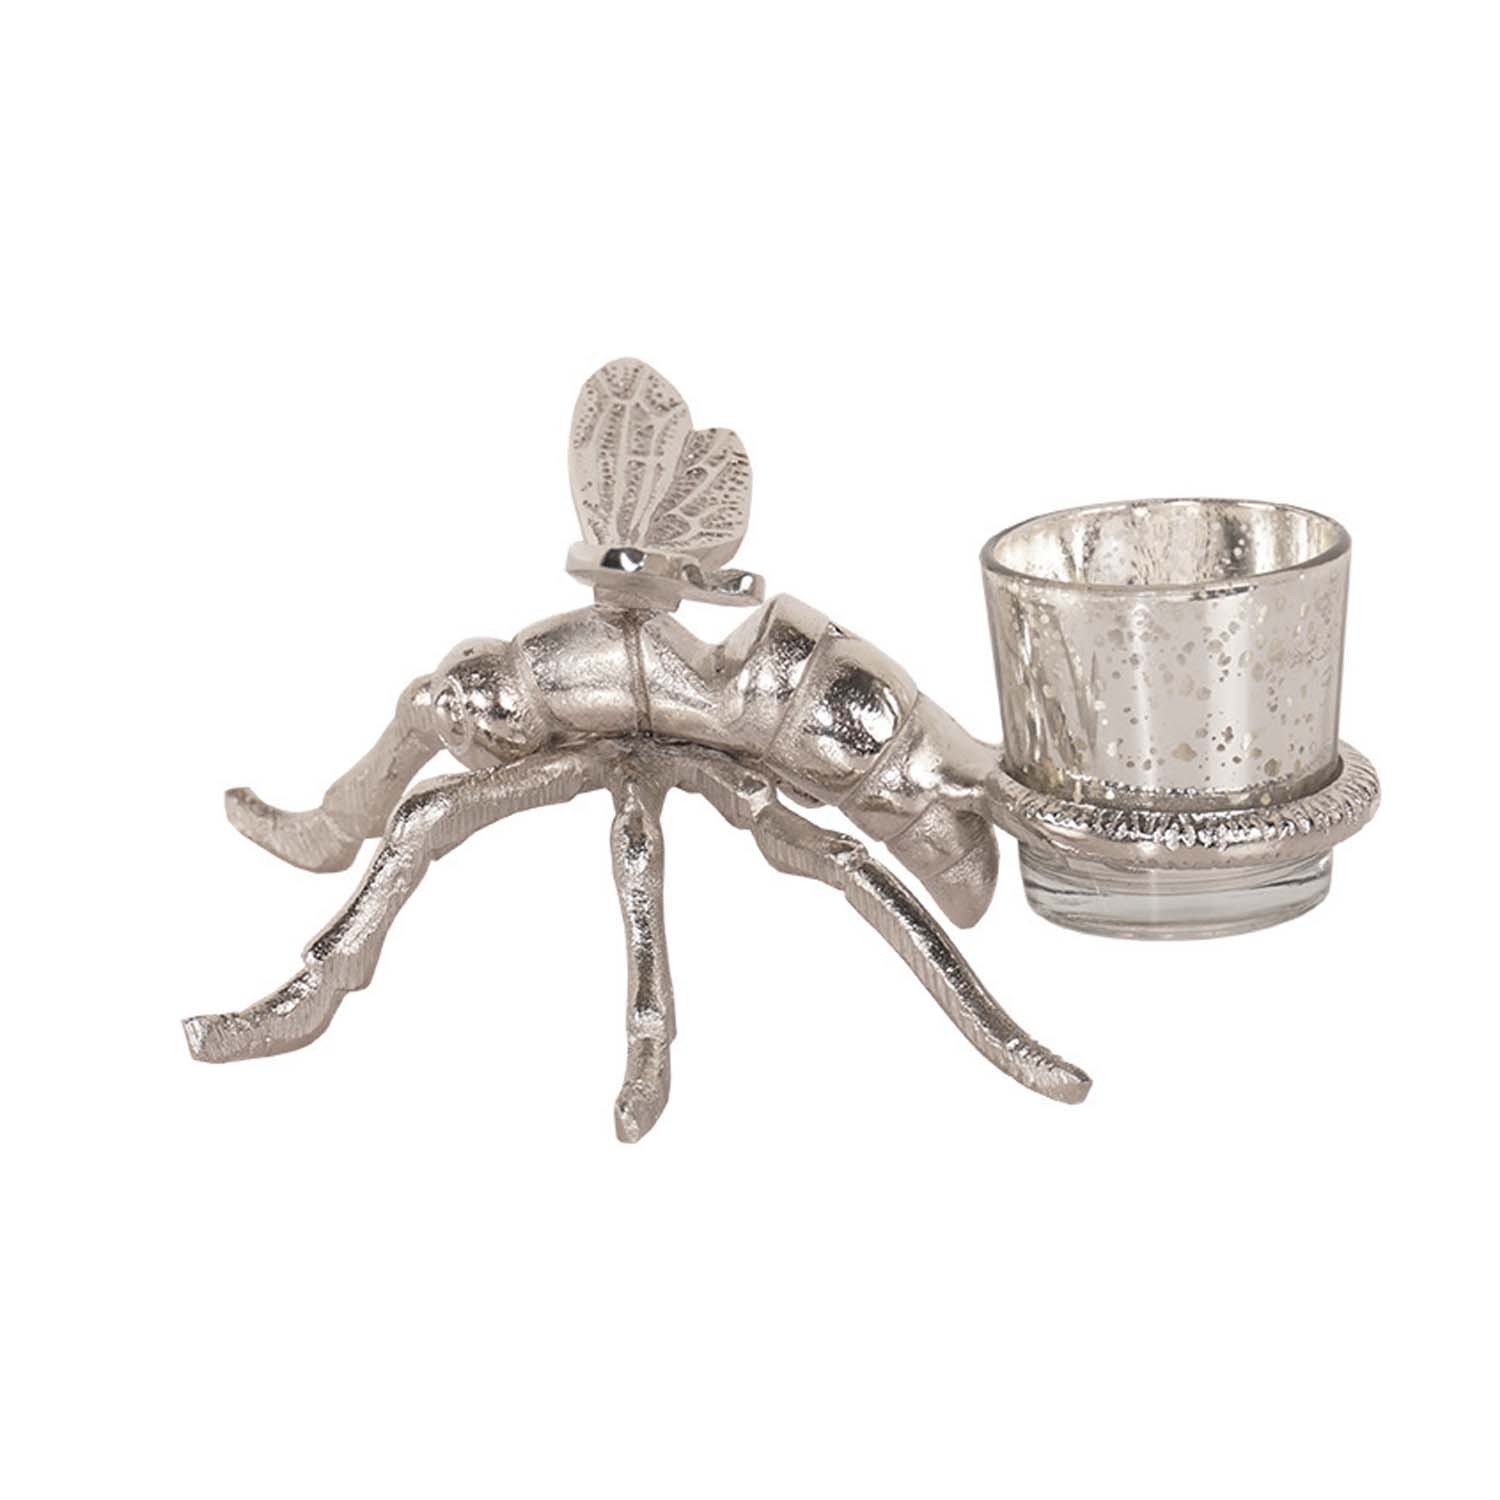 Silver Dragonfly Tealight Holder - Image 1